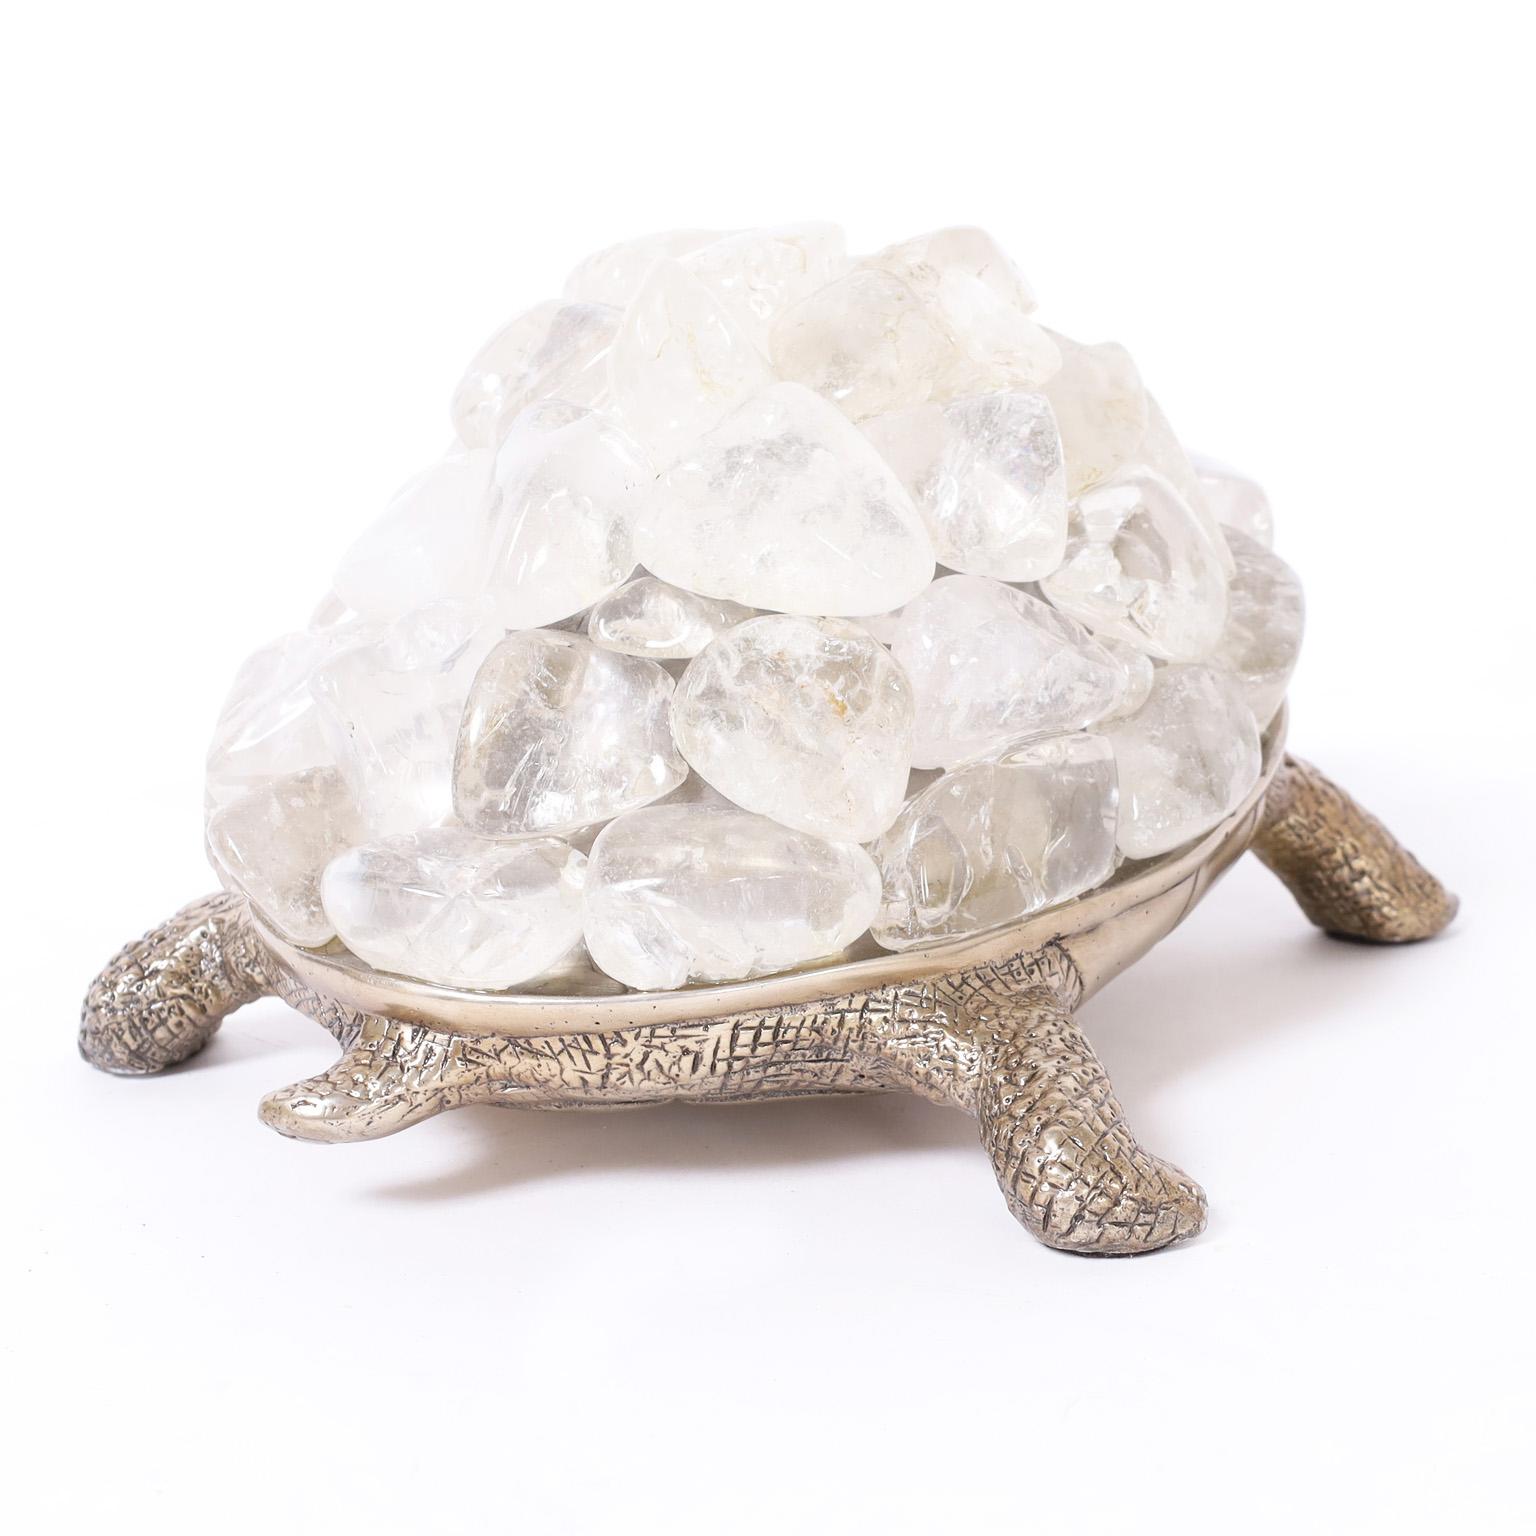 Philippine Silver Plate Turtle with Crystal Rocks For Sale